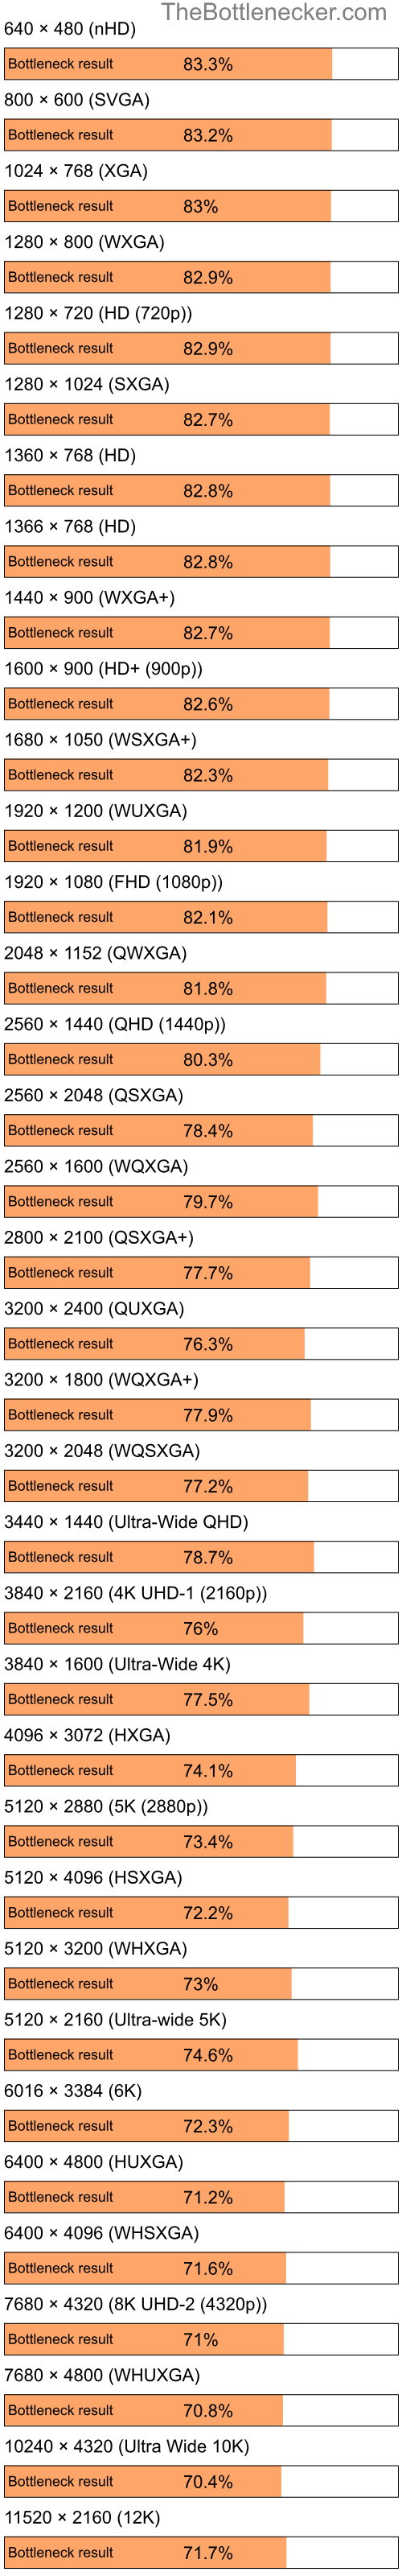 Bottleneck results by resolution for AMD Athlon XP 2000+ and NVIDIA GeForce RTX 2070 SUPER in Graphic Card Intense Tasks